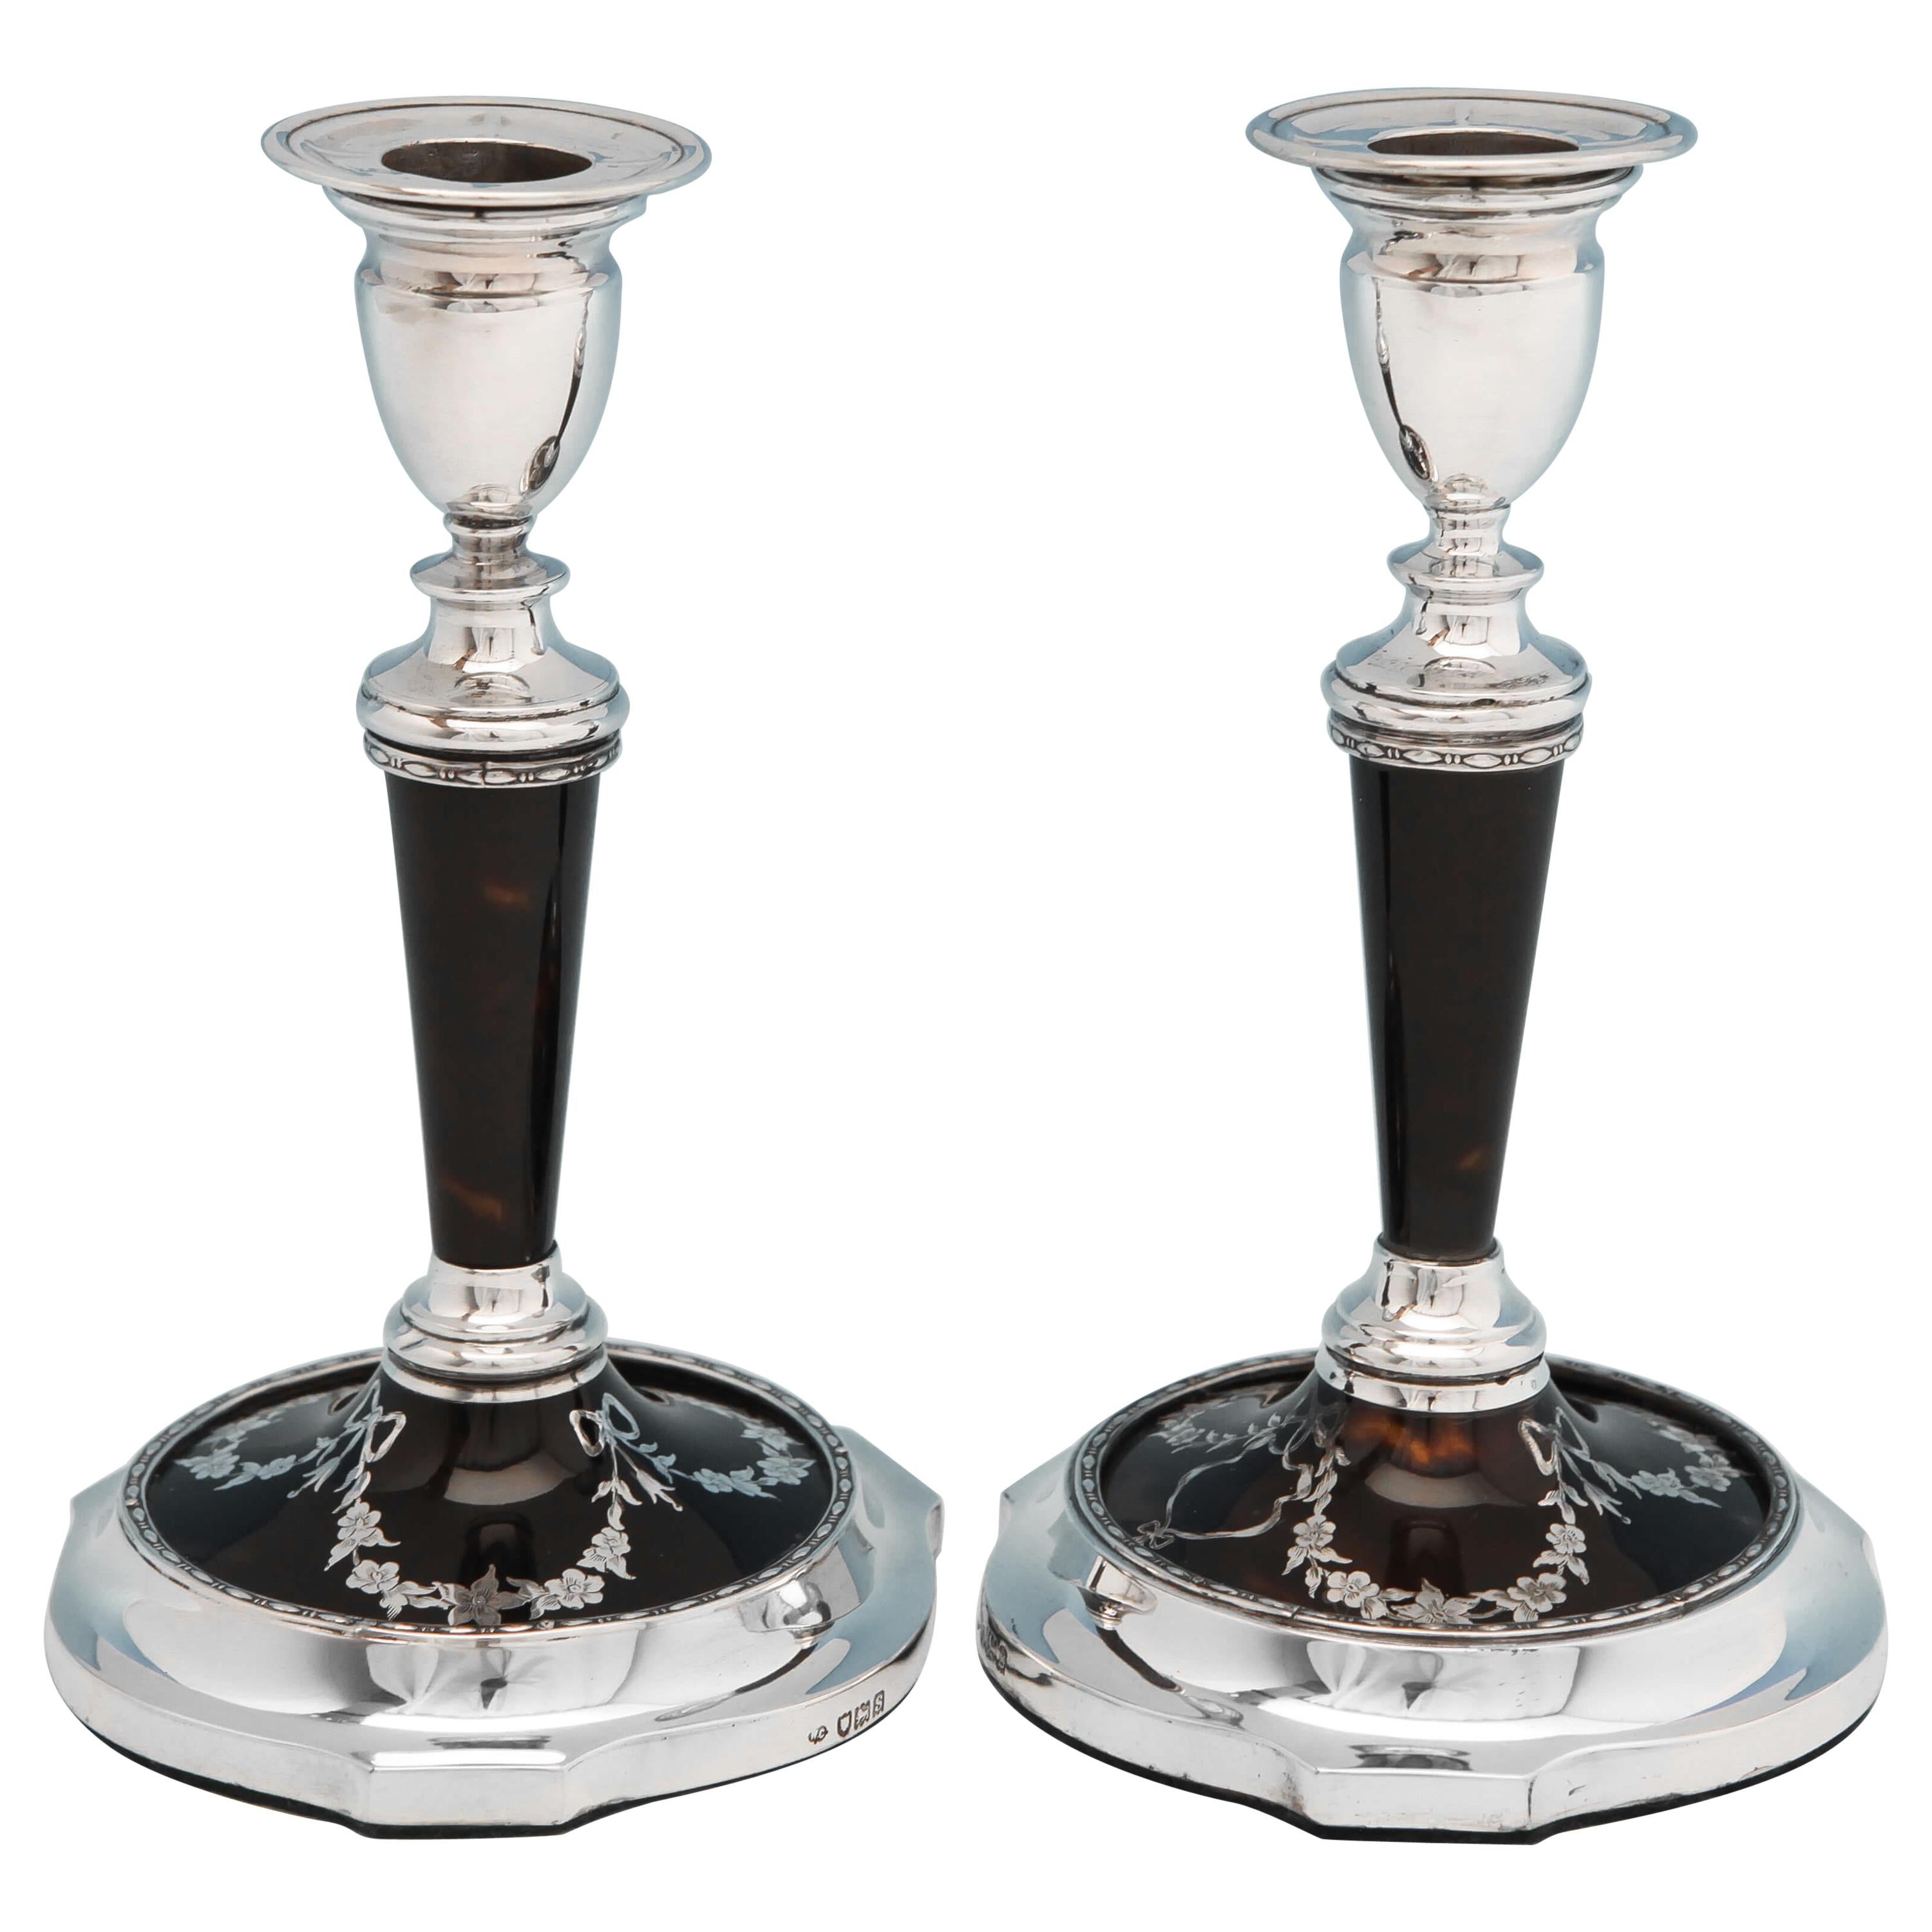 Neoclassical Revival Antique Tortoiseshell & Sterling Silver Candlesticks 1913